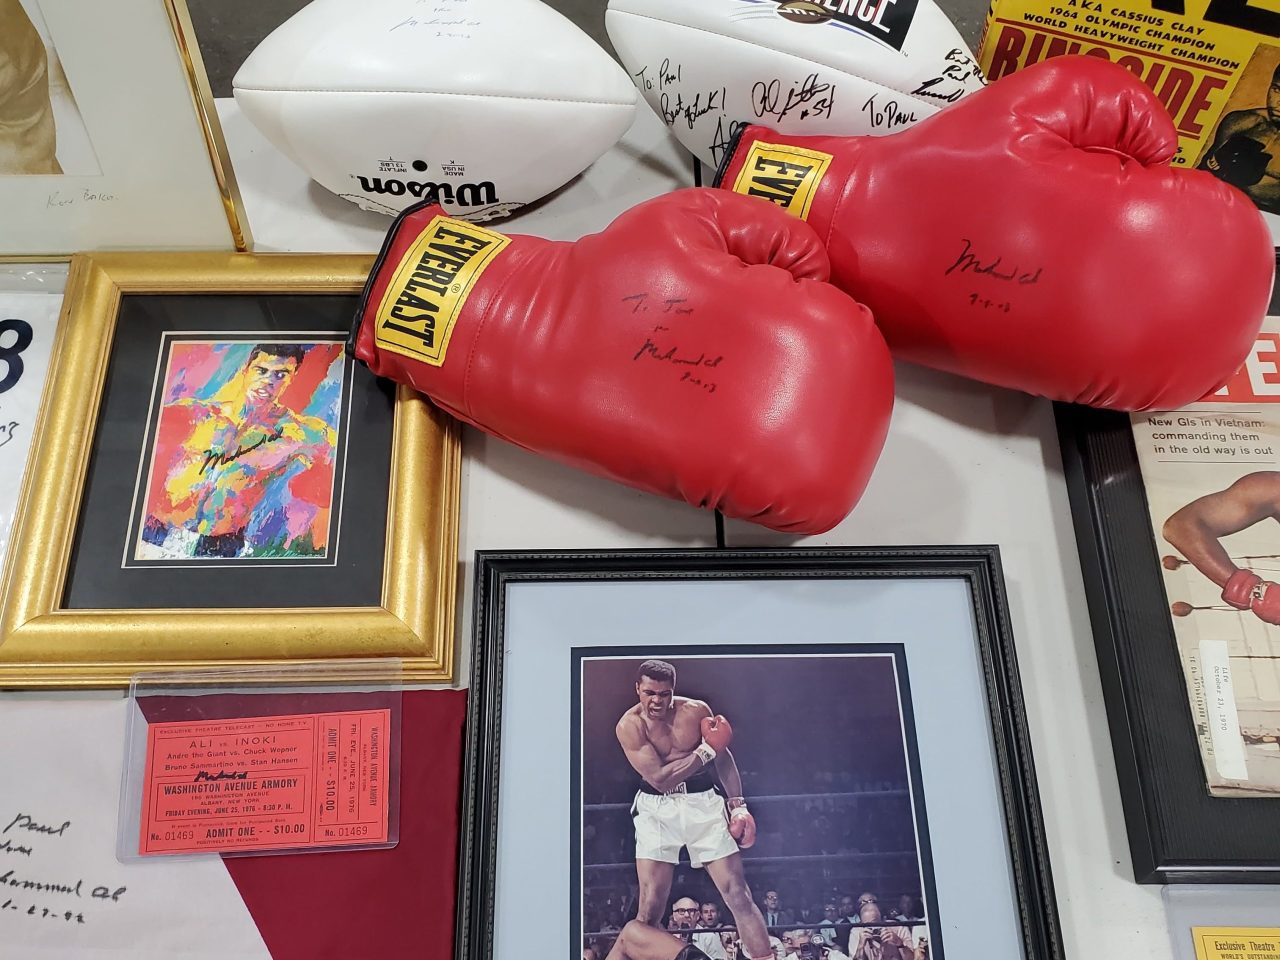 Muhammad Alis former lawyer auctions off hundreds of items signed by The Greatest [Video]